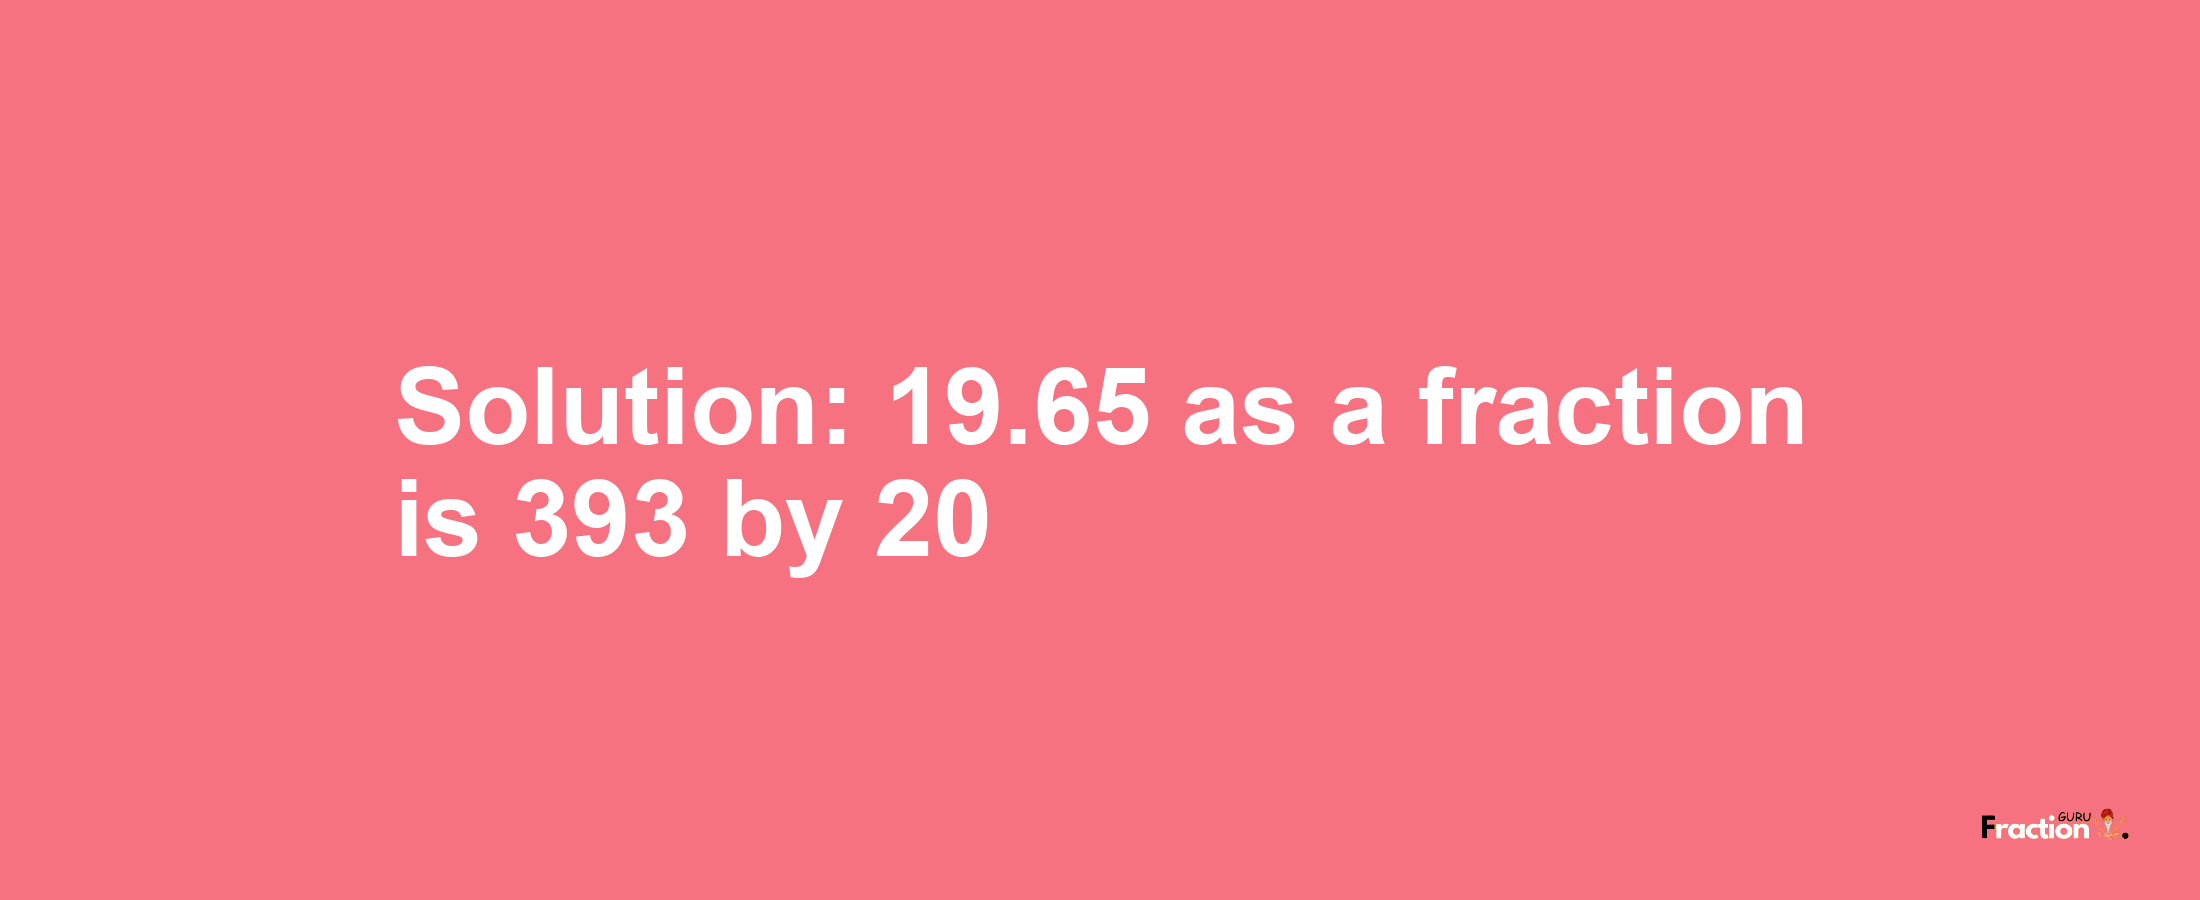 Solution:19.65 as a fraction is 393/20